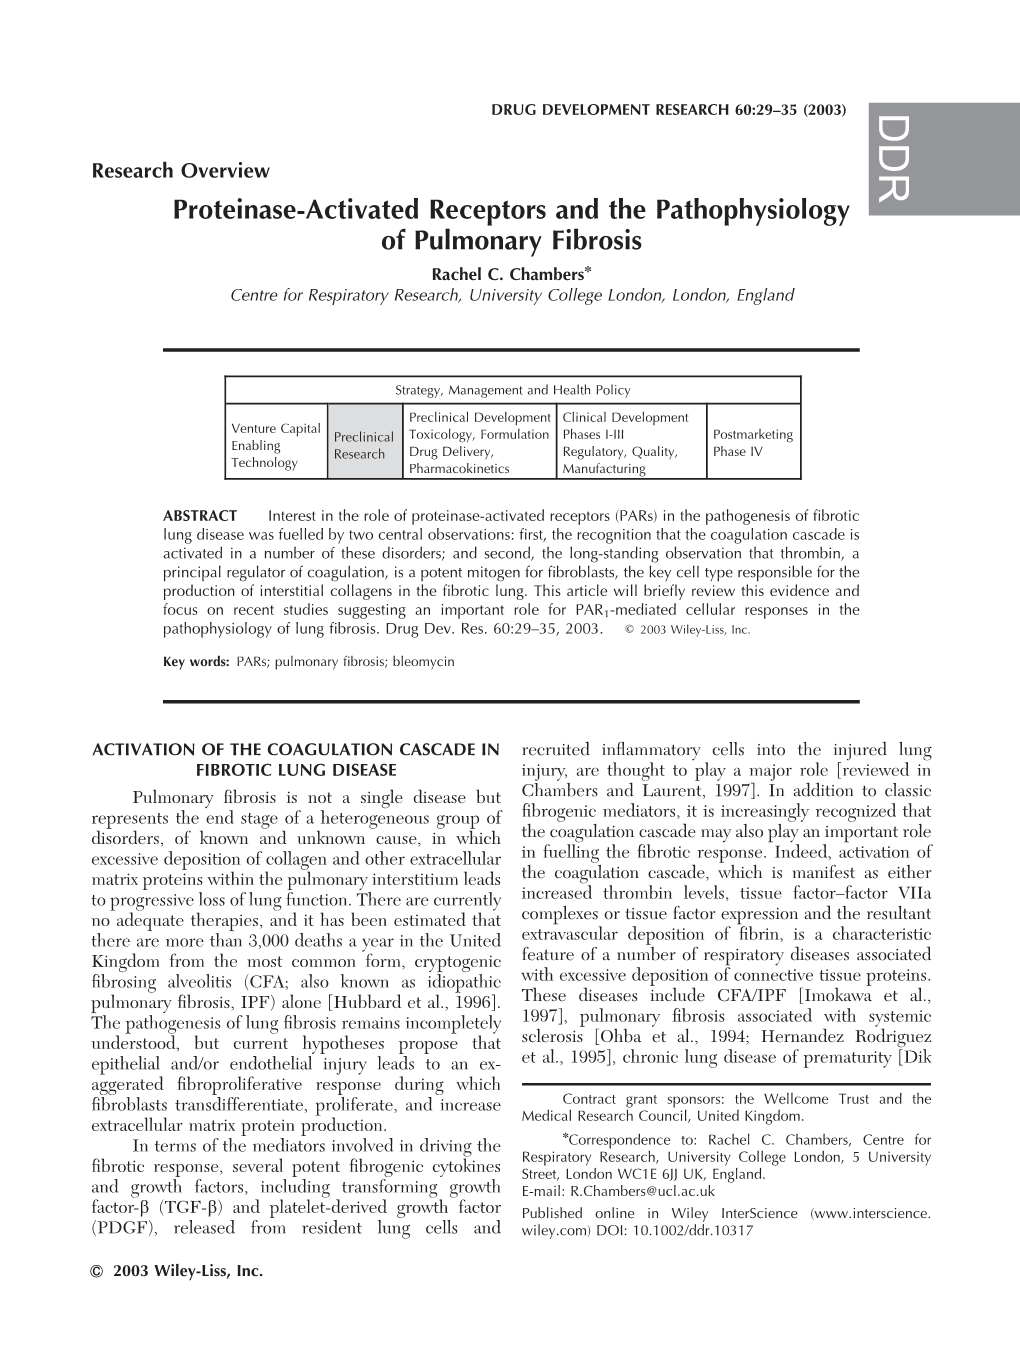 Proteinase-Activated Receptors and the Pathophysiology of Pulmonary Fibrosis Rachel C